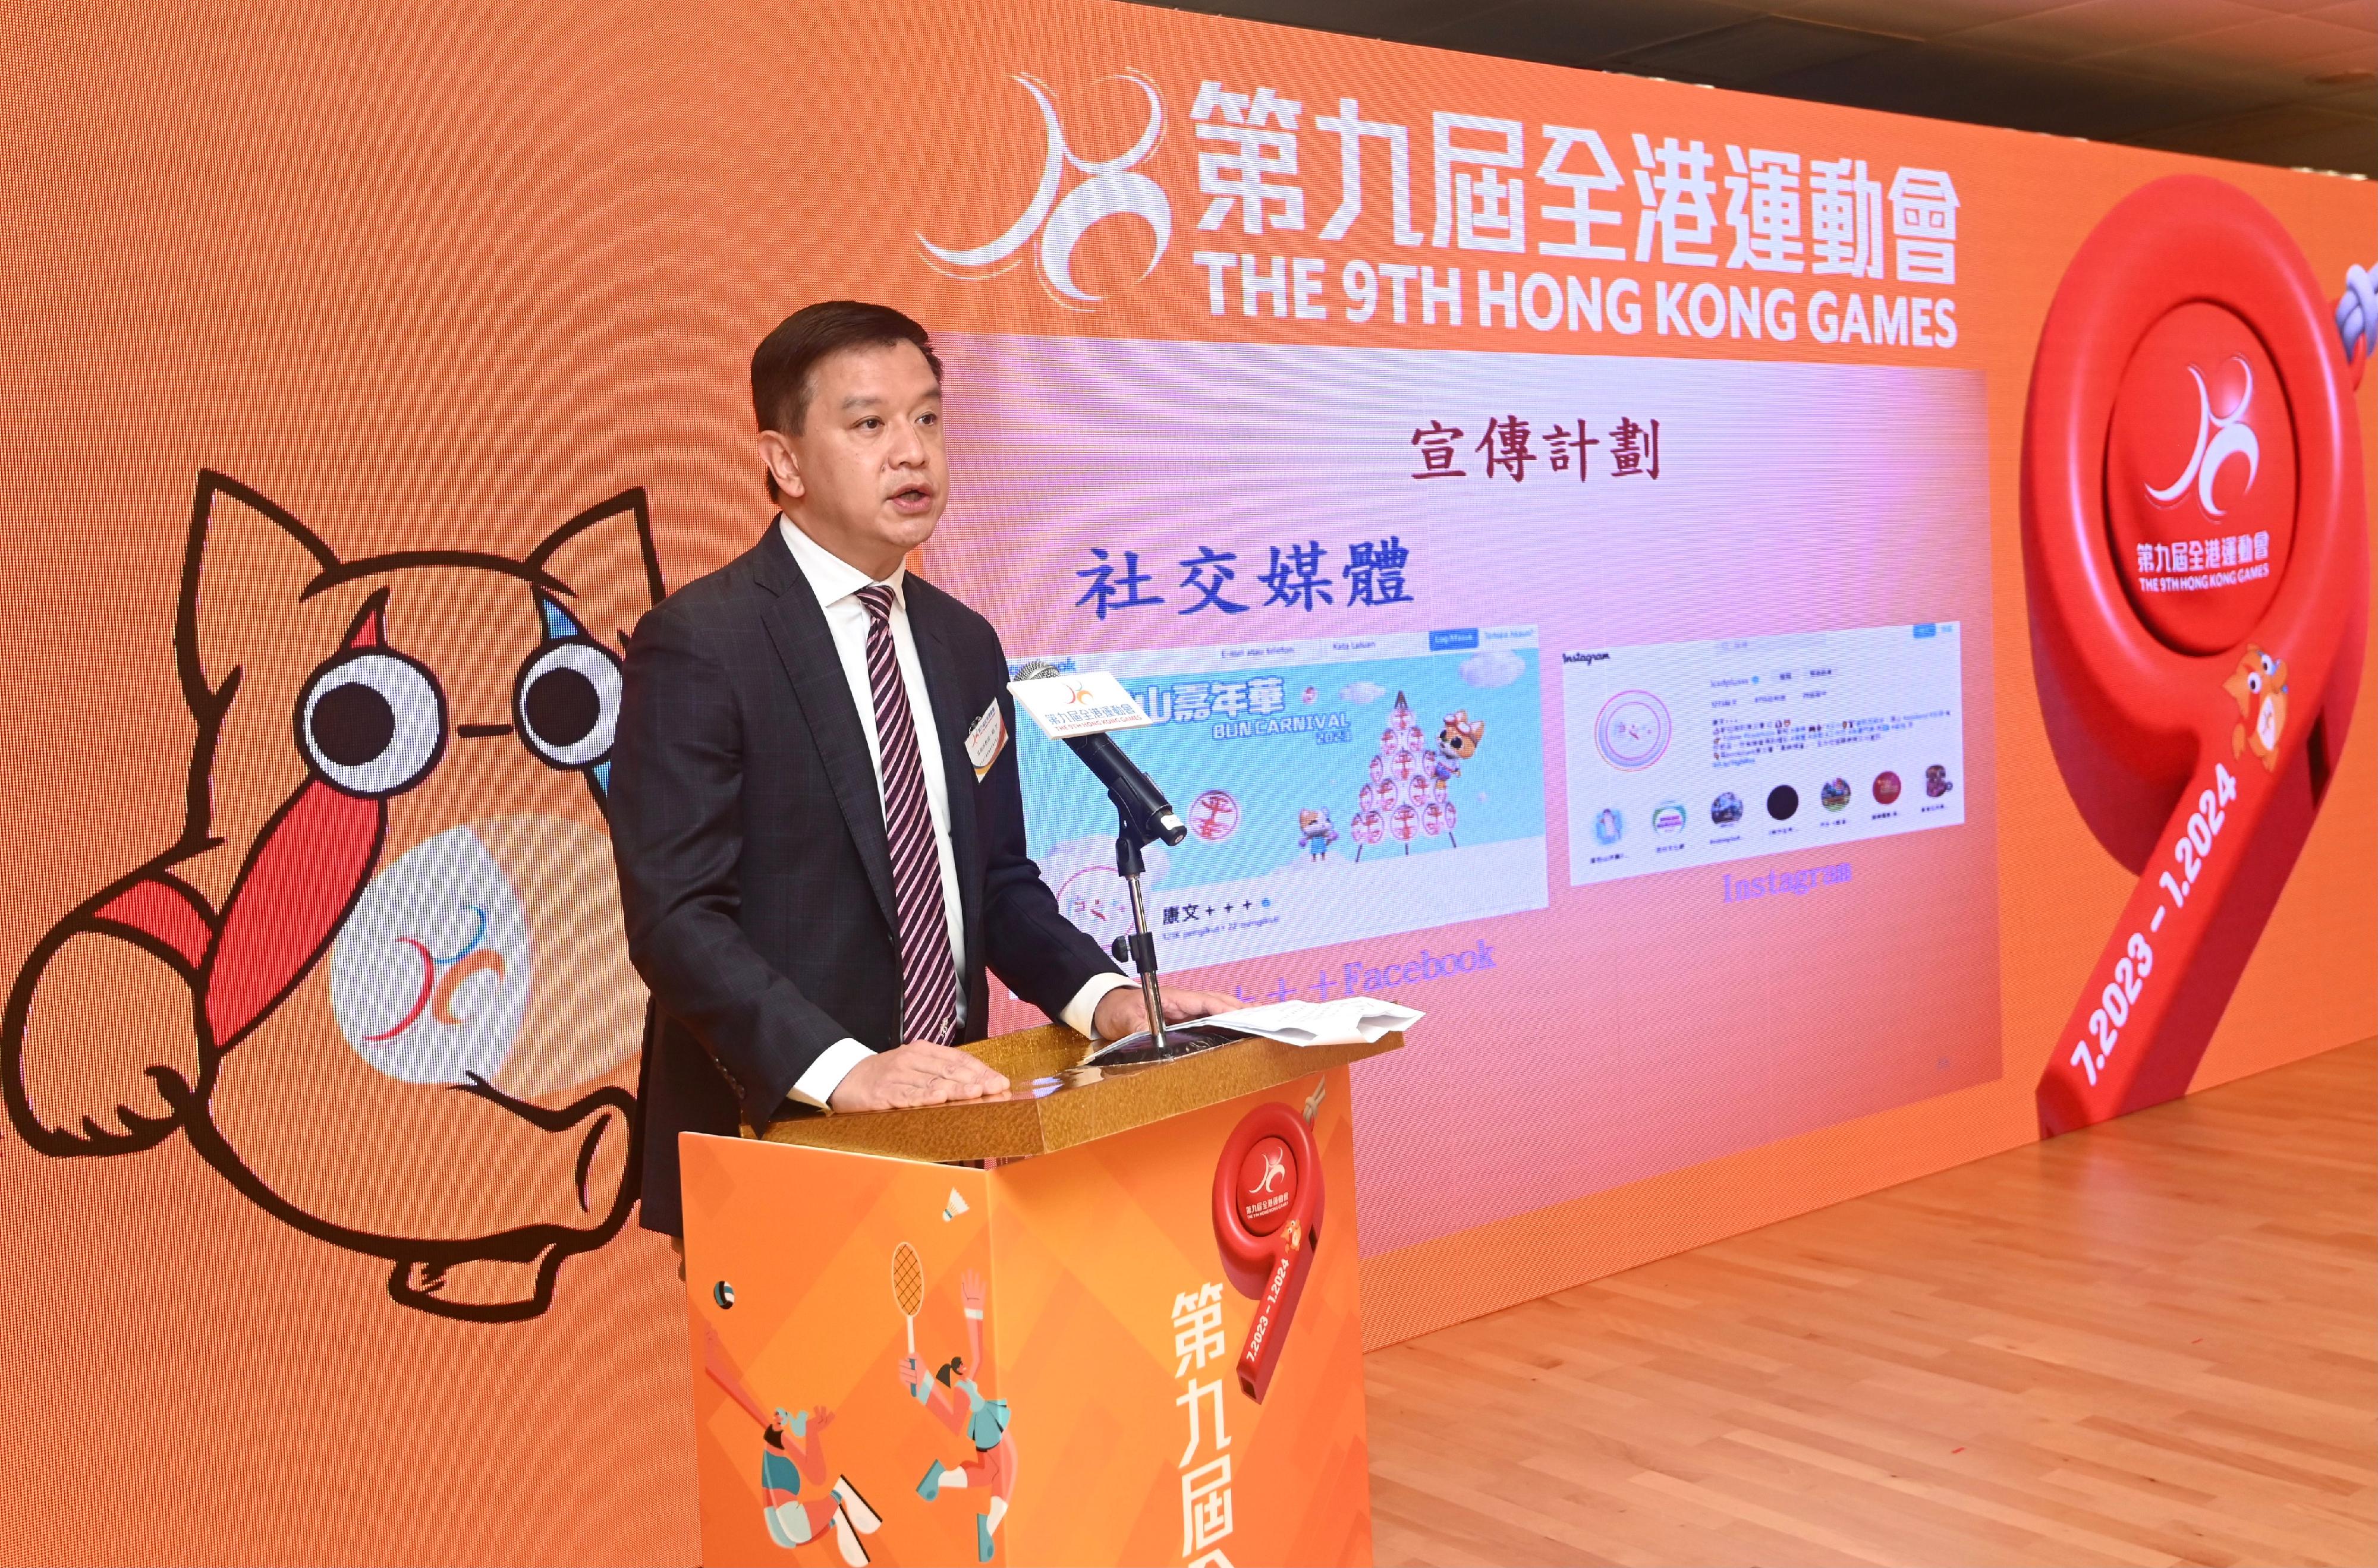 The Chairman of the 9th Hong Kong Games (HKG) Organising Committee, Professor Patrick Yung, announces details of the 9th HKG in the launching ceremony today (June 23).

